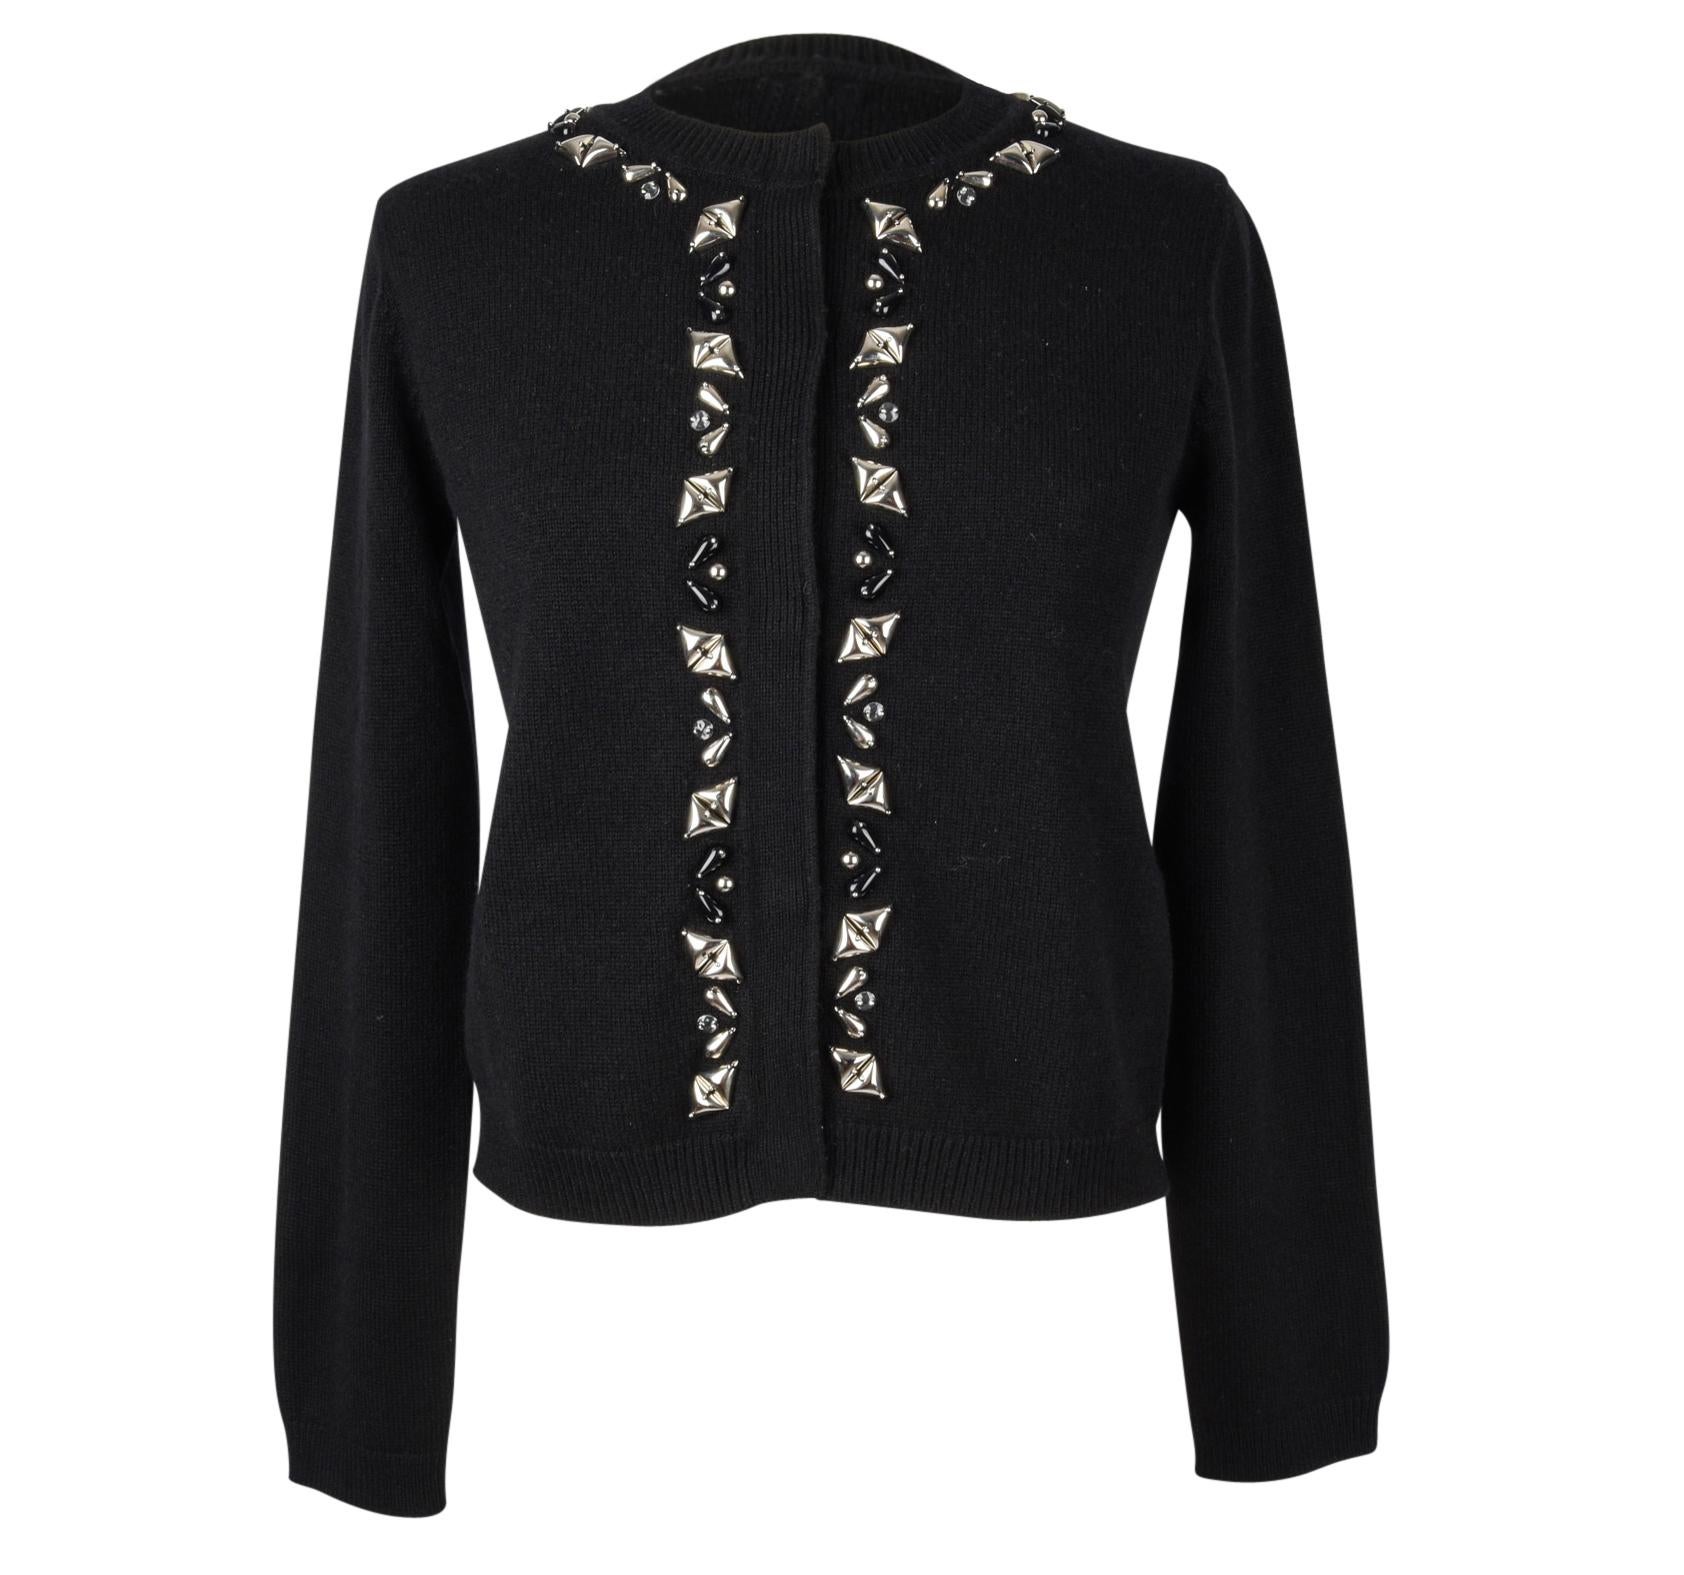 Guaranteed authentic Louis Vuitton black cashmere embellished cardigan. 
Front has black and silver embellishment along neckline and placket. 
5 snap button in hidden placket.
Fabric is 100% cashmere.

SIZE  S

CARDIGAN MEASURES
LENGTH  20